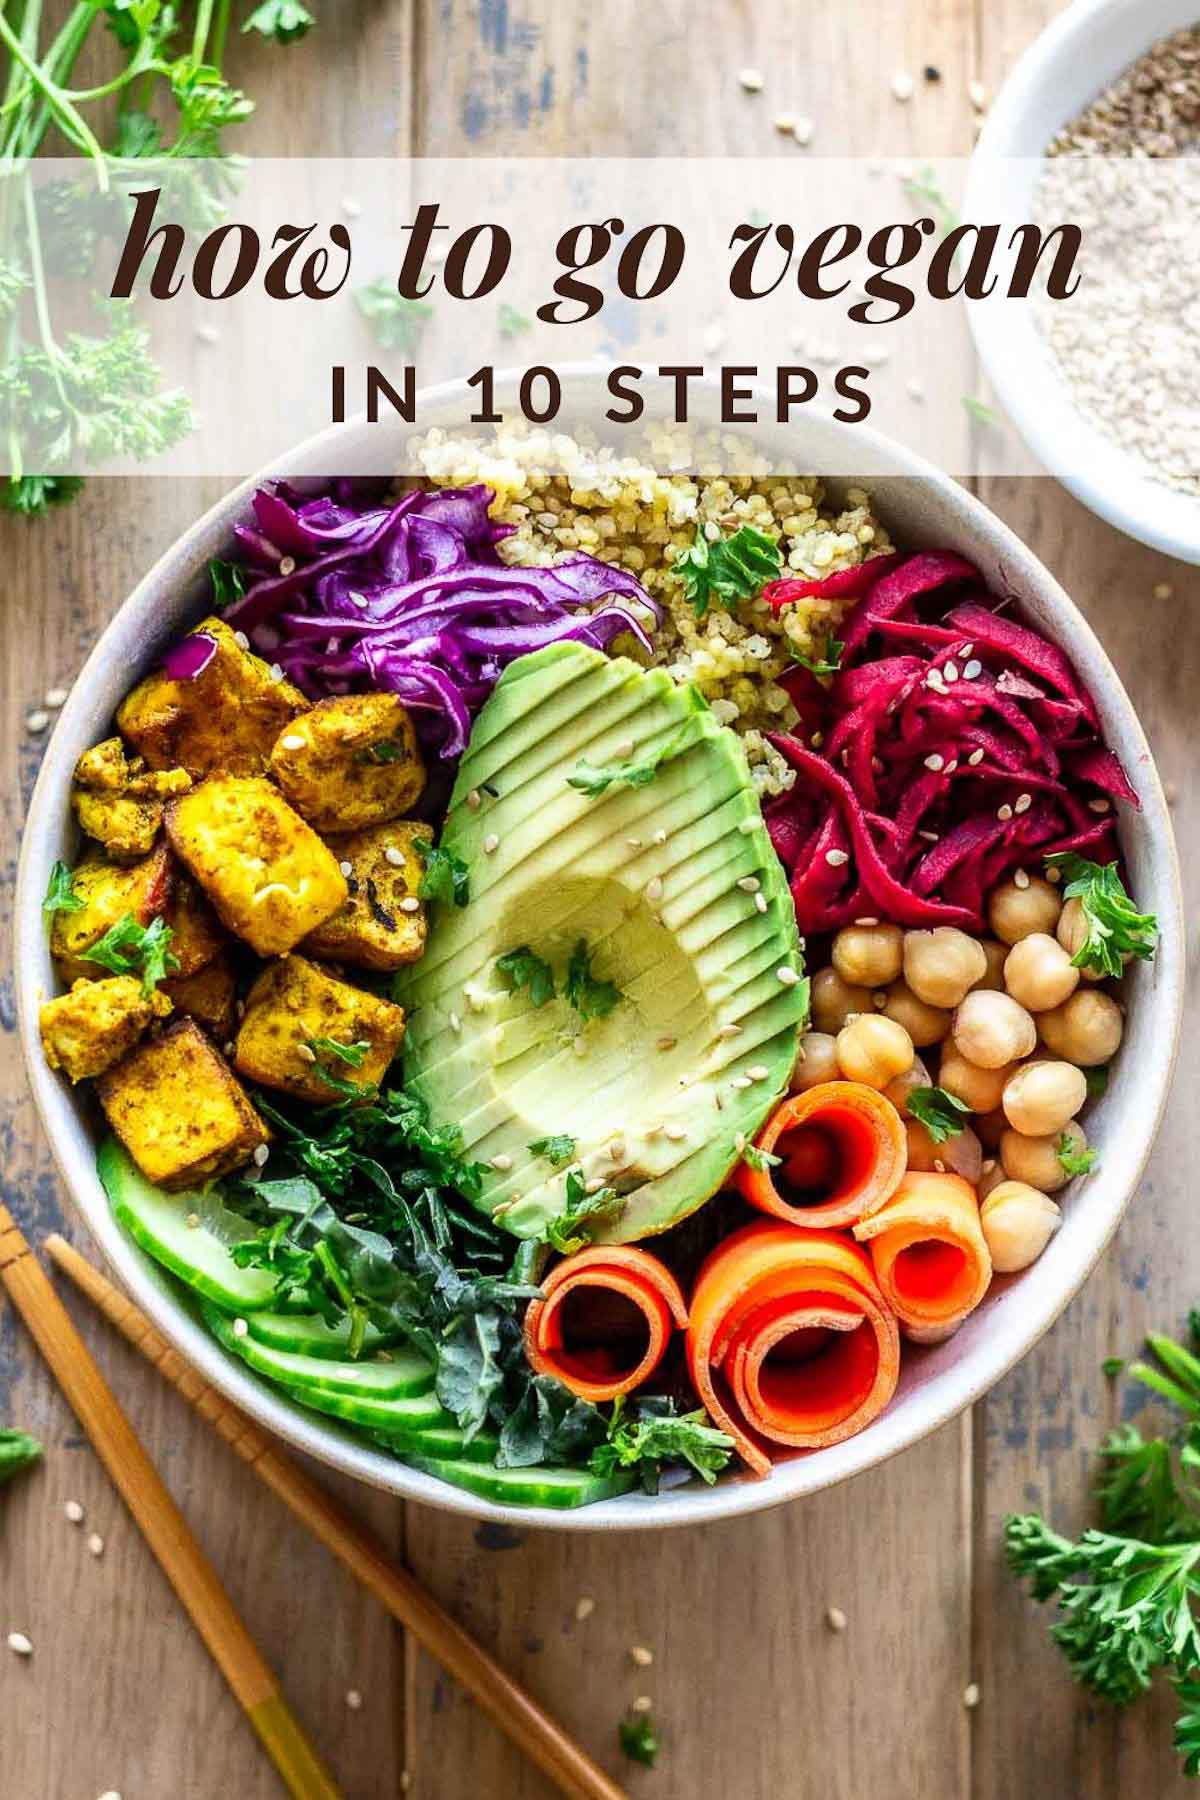 Wondering how to go vegan for beginners but not sure where to start or what you can eat? Follow these 10 steps to make becoming a vegan a breeze!